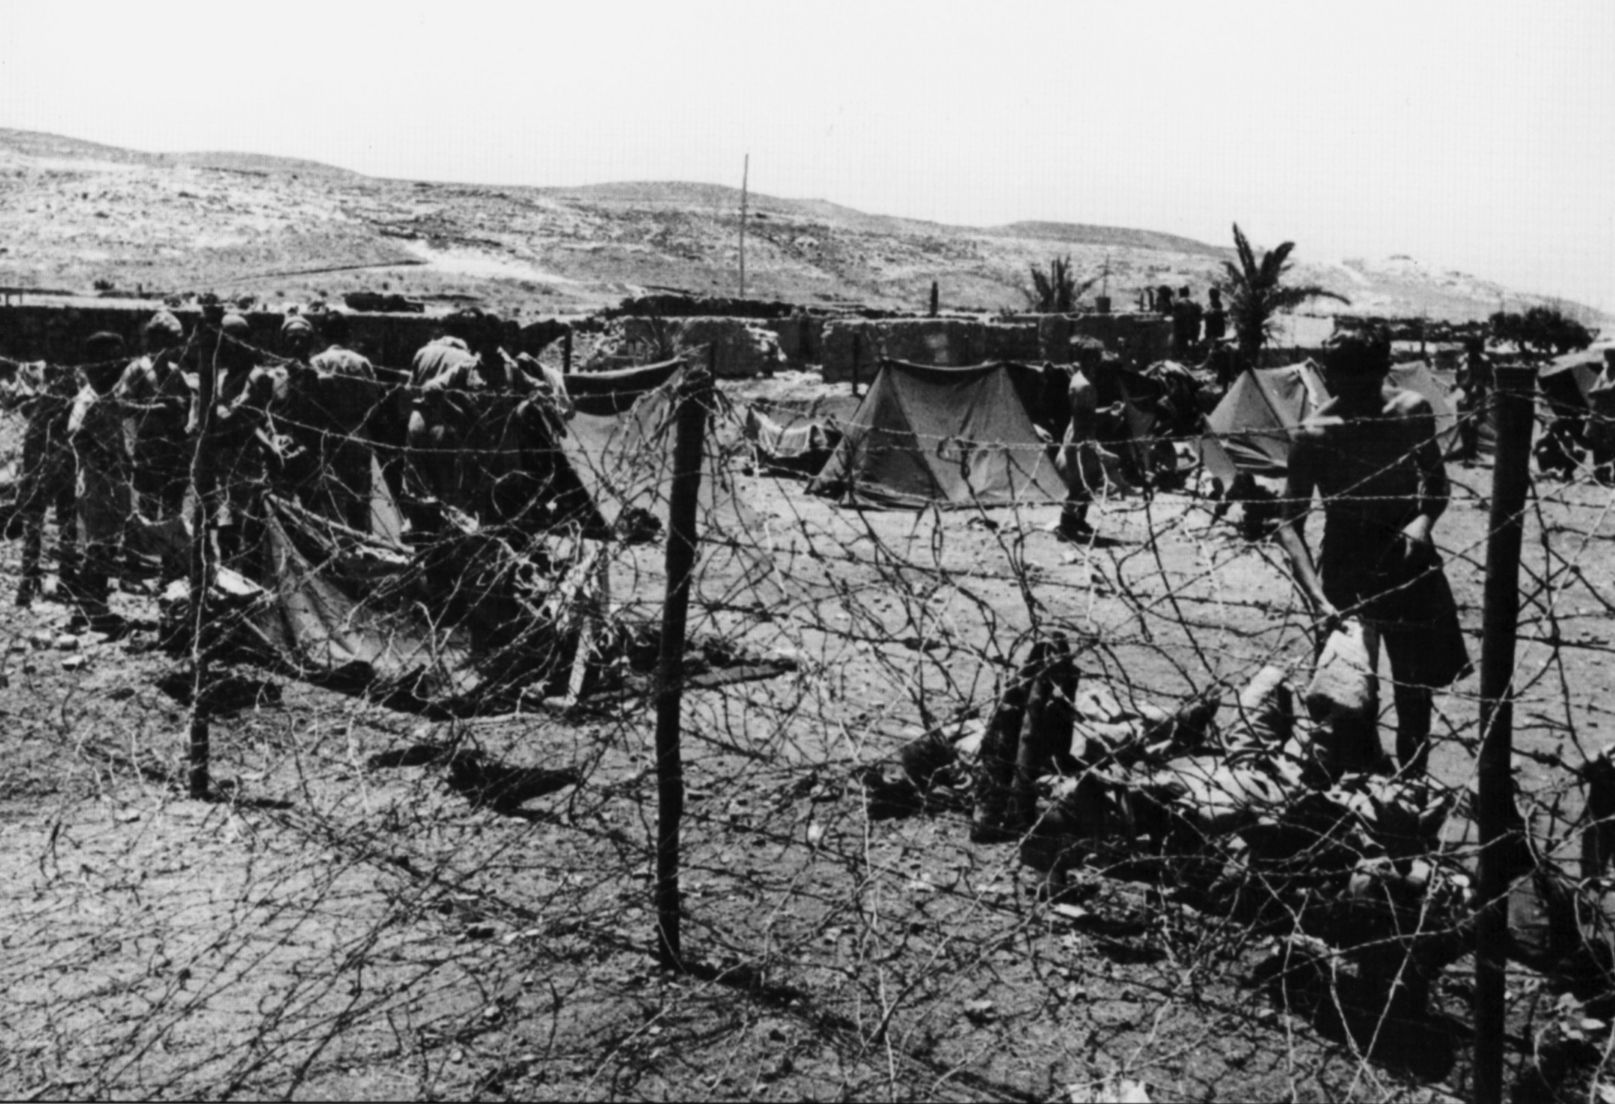 British POW camp in North Africa. All but two of the 22 surviving raiders were captured by the Germans. 